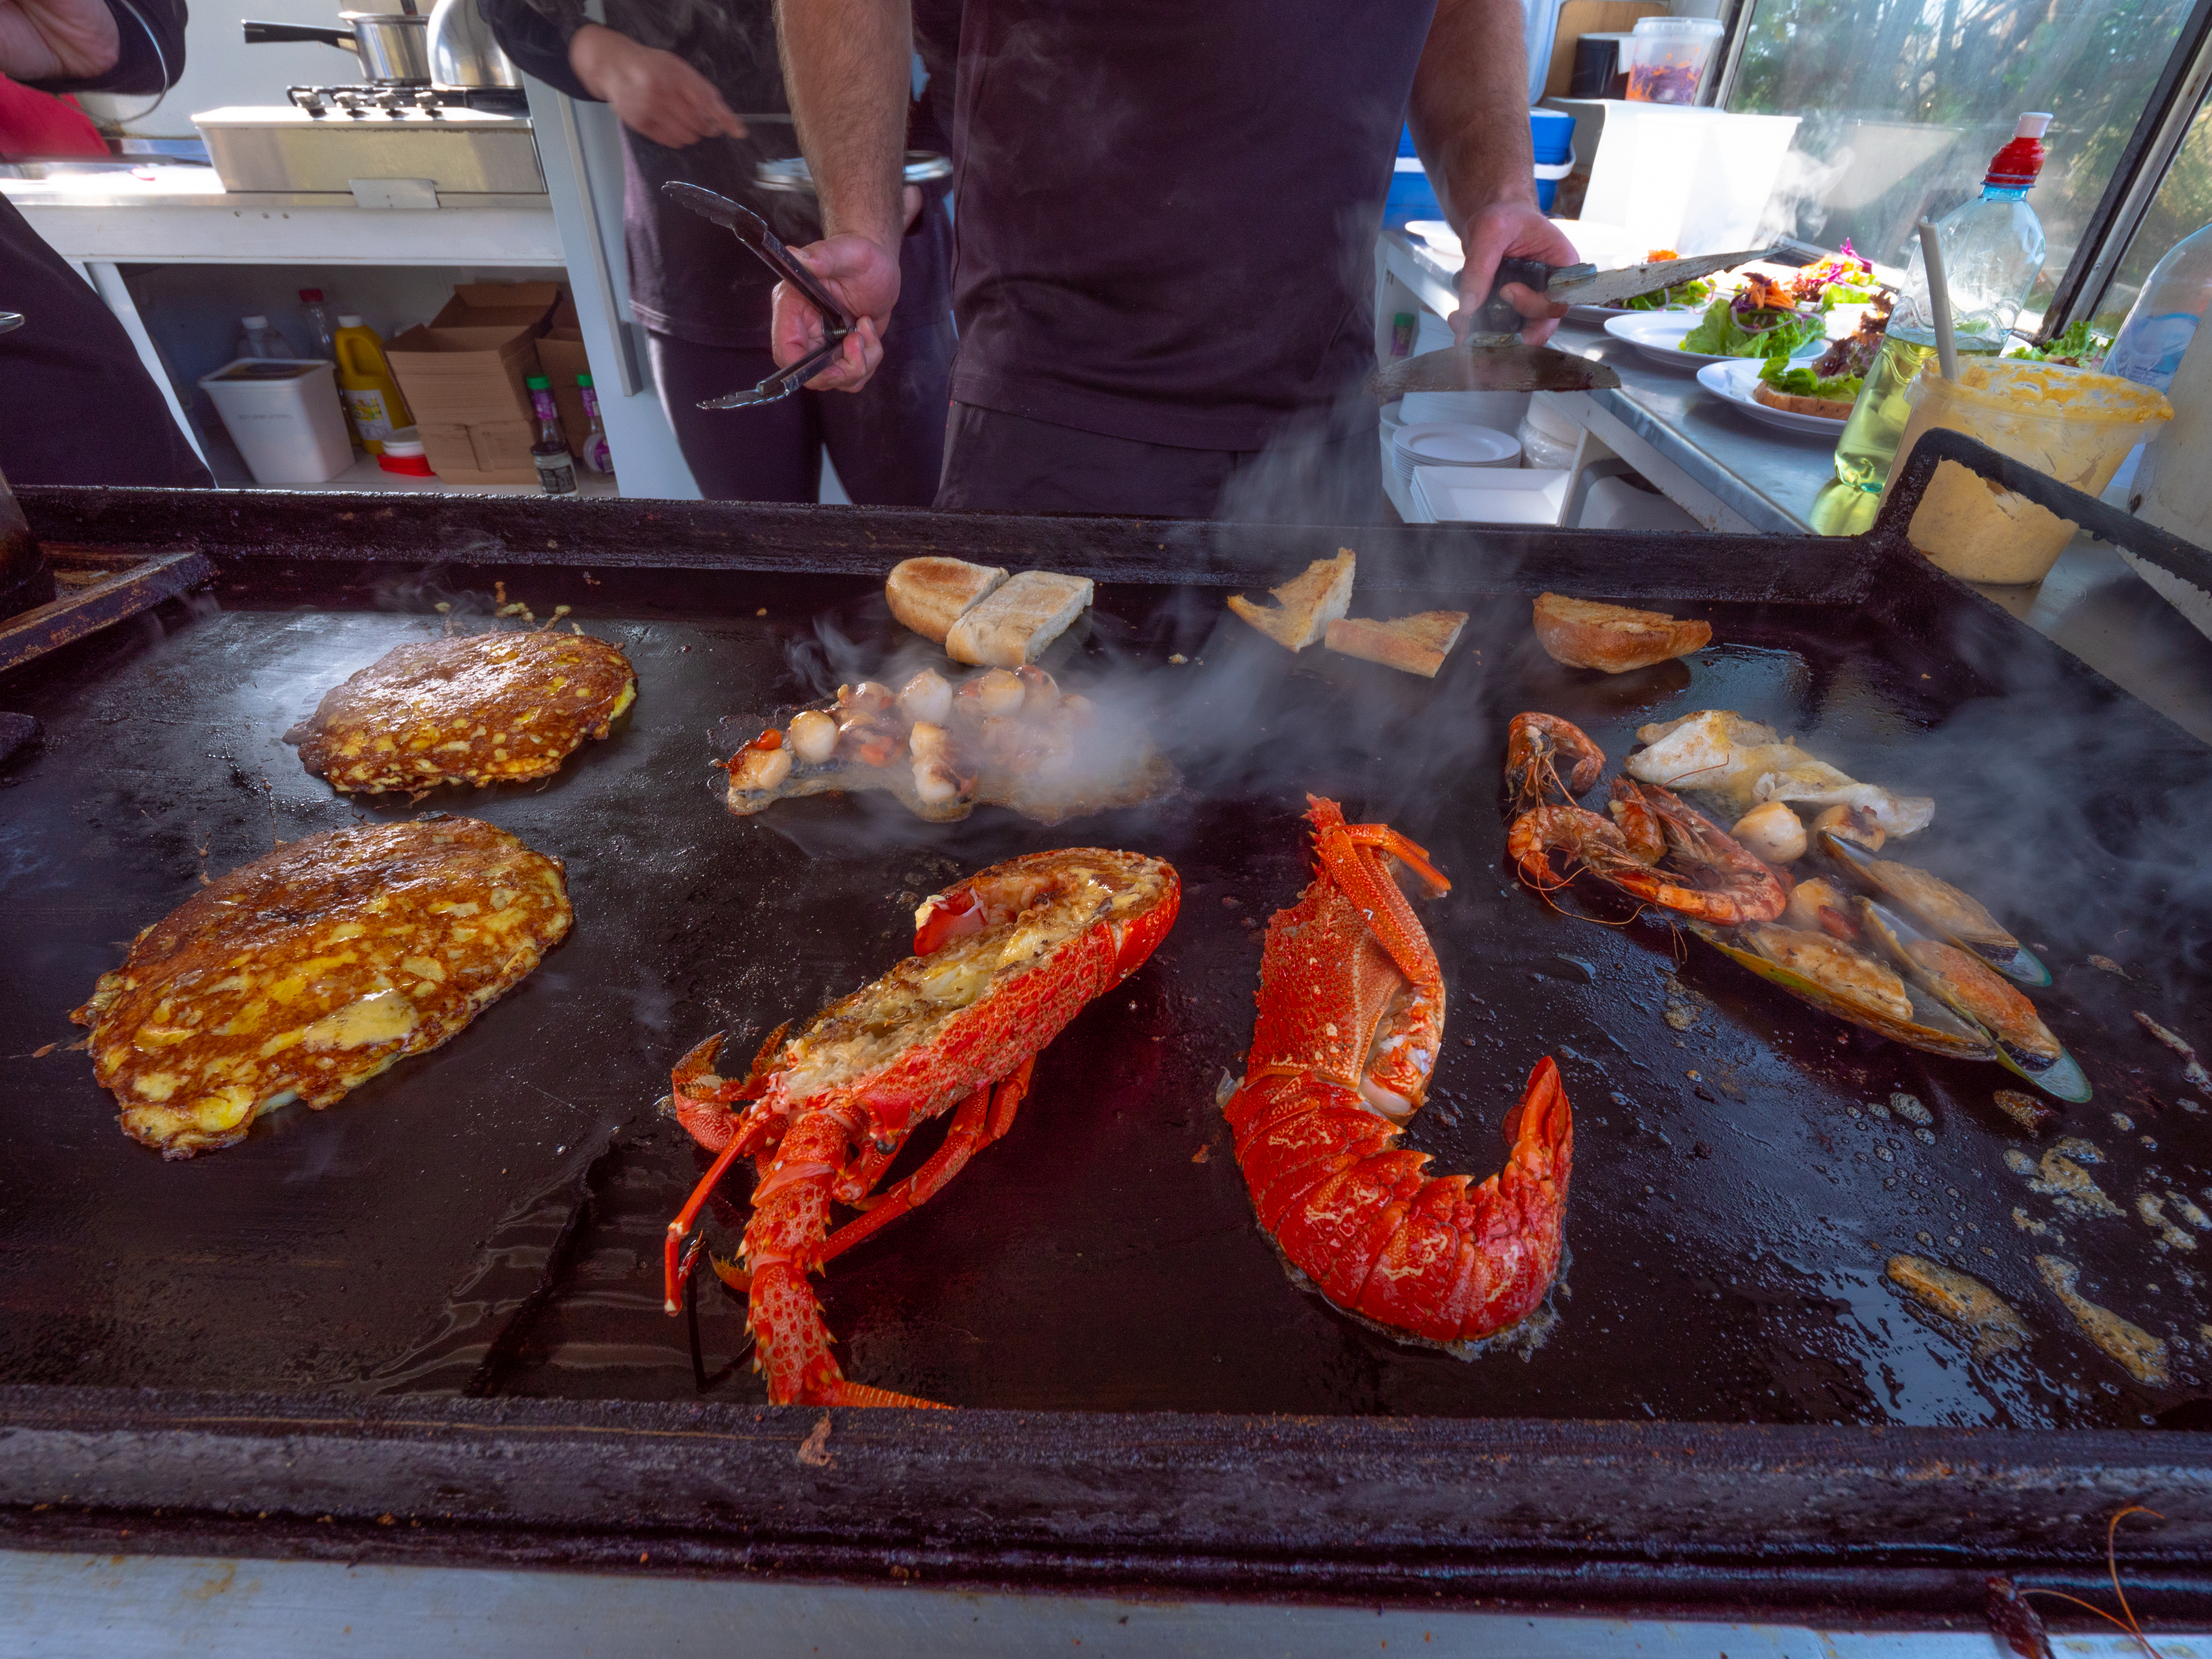 Where to get the best seafood - Top 5 spots